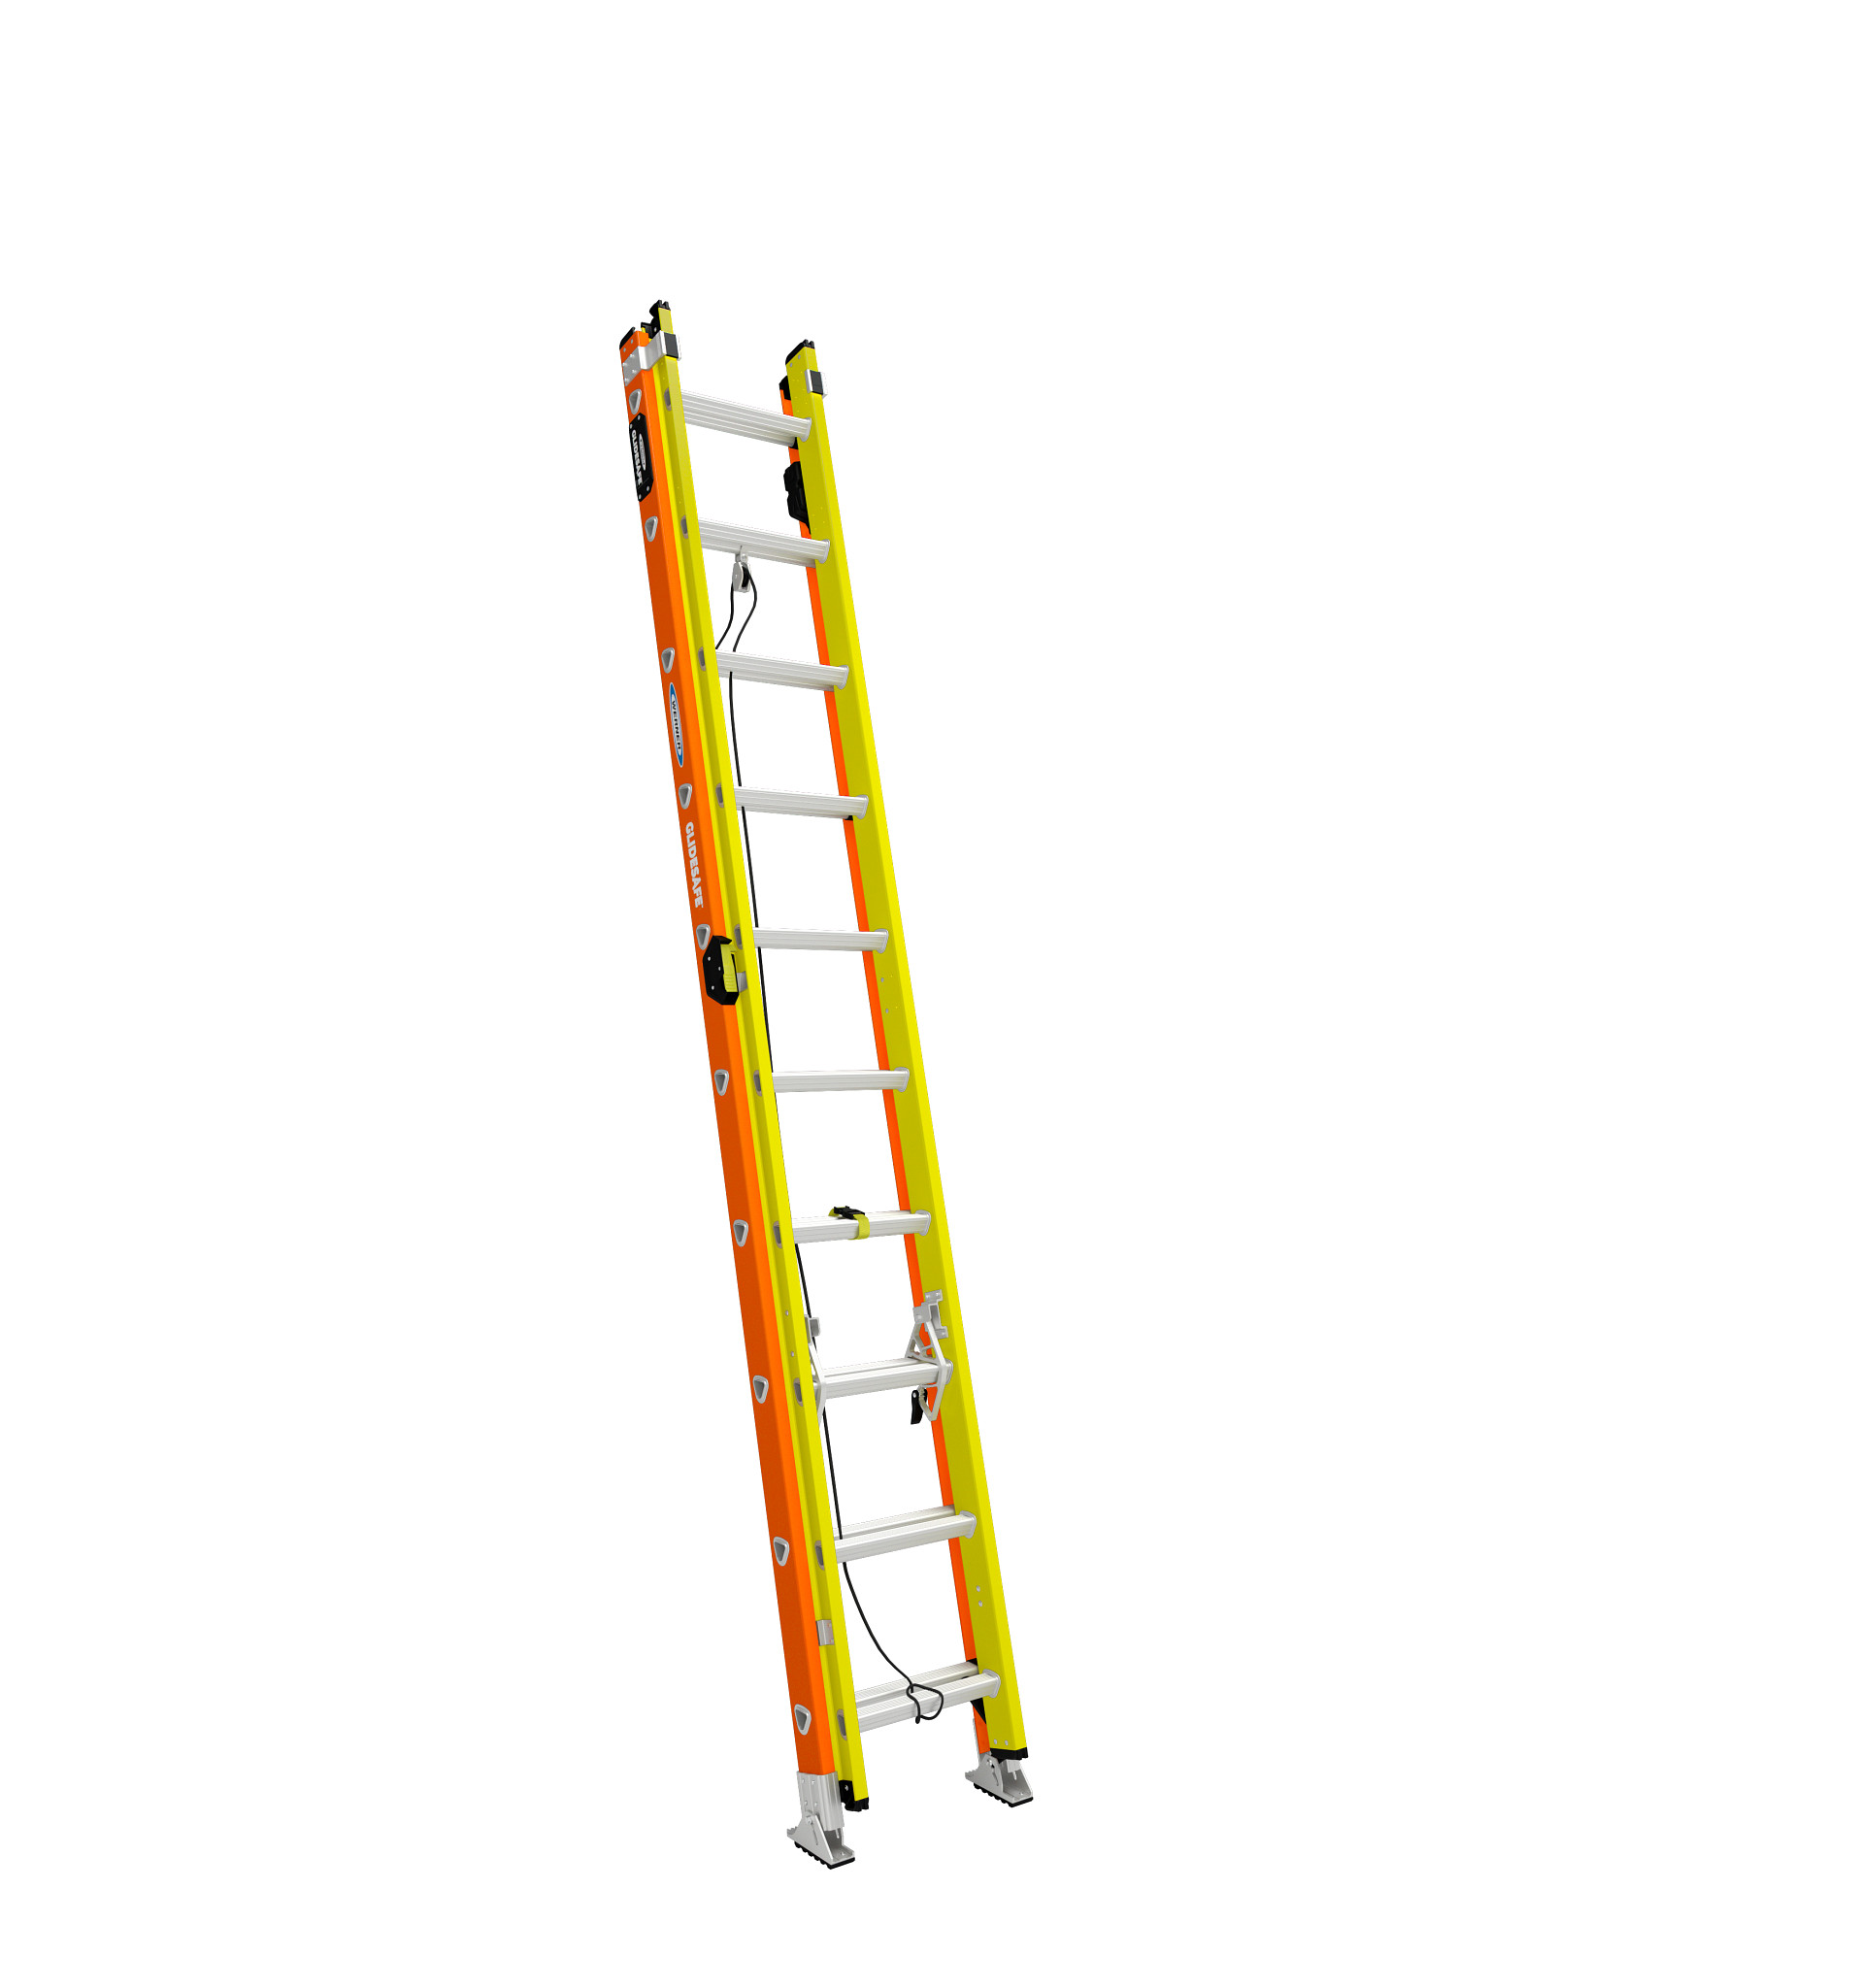 11 Rung Trade Master Combi All-in-One Extension Ladder Step Ladder & Free Standing Ladders Plus Ladder Clamps